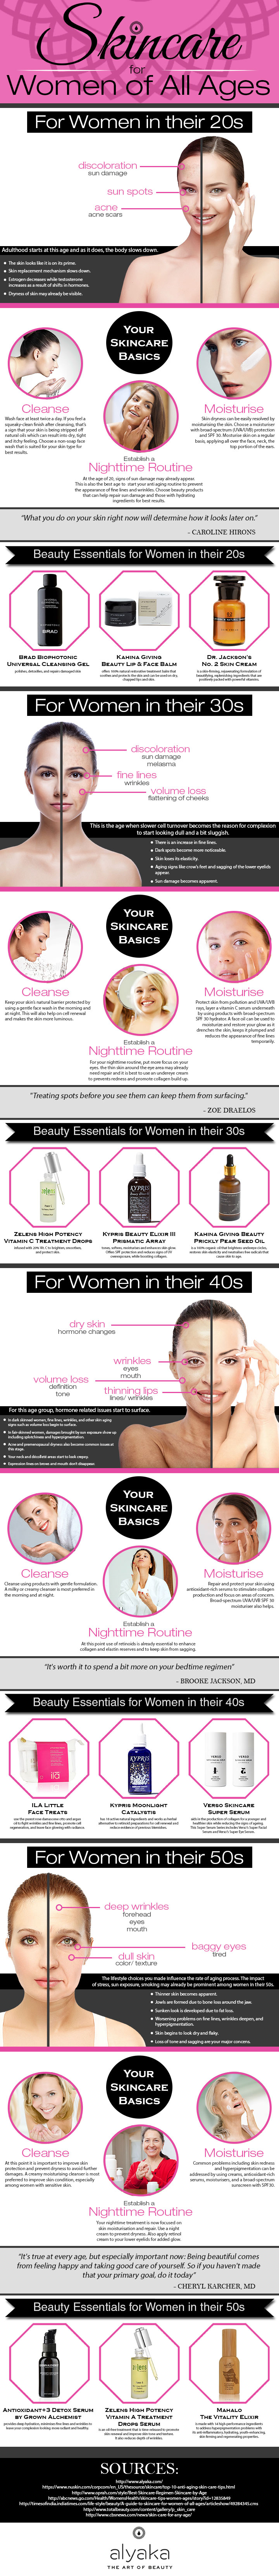 Skincare for women of all ages infographic